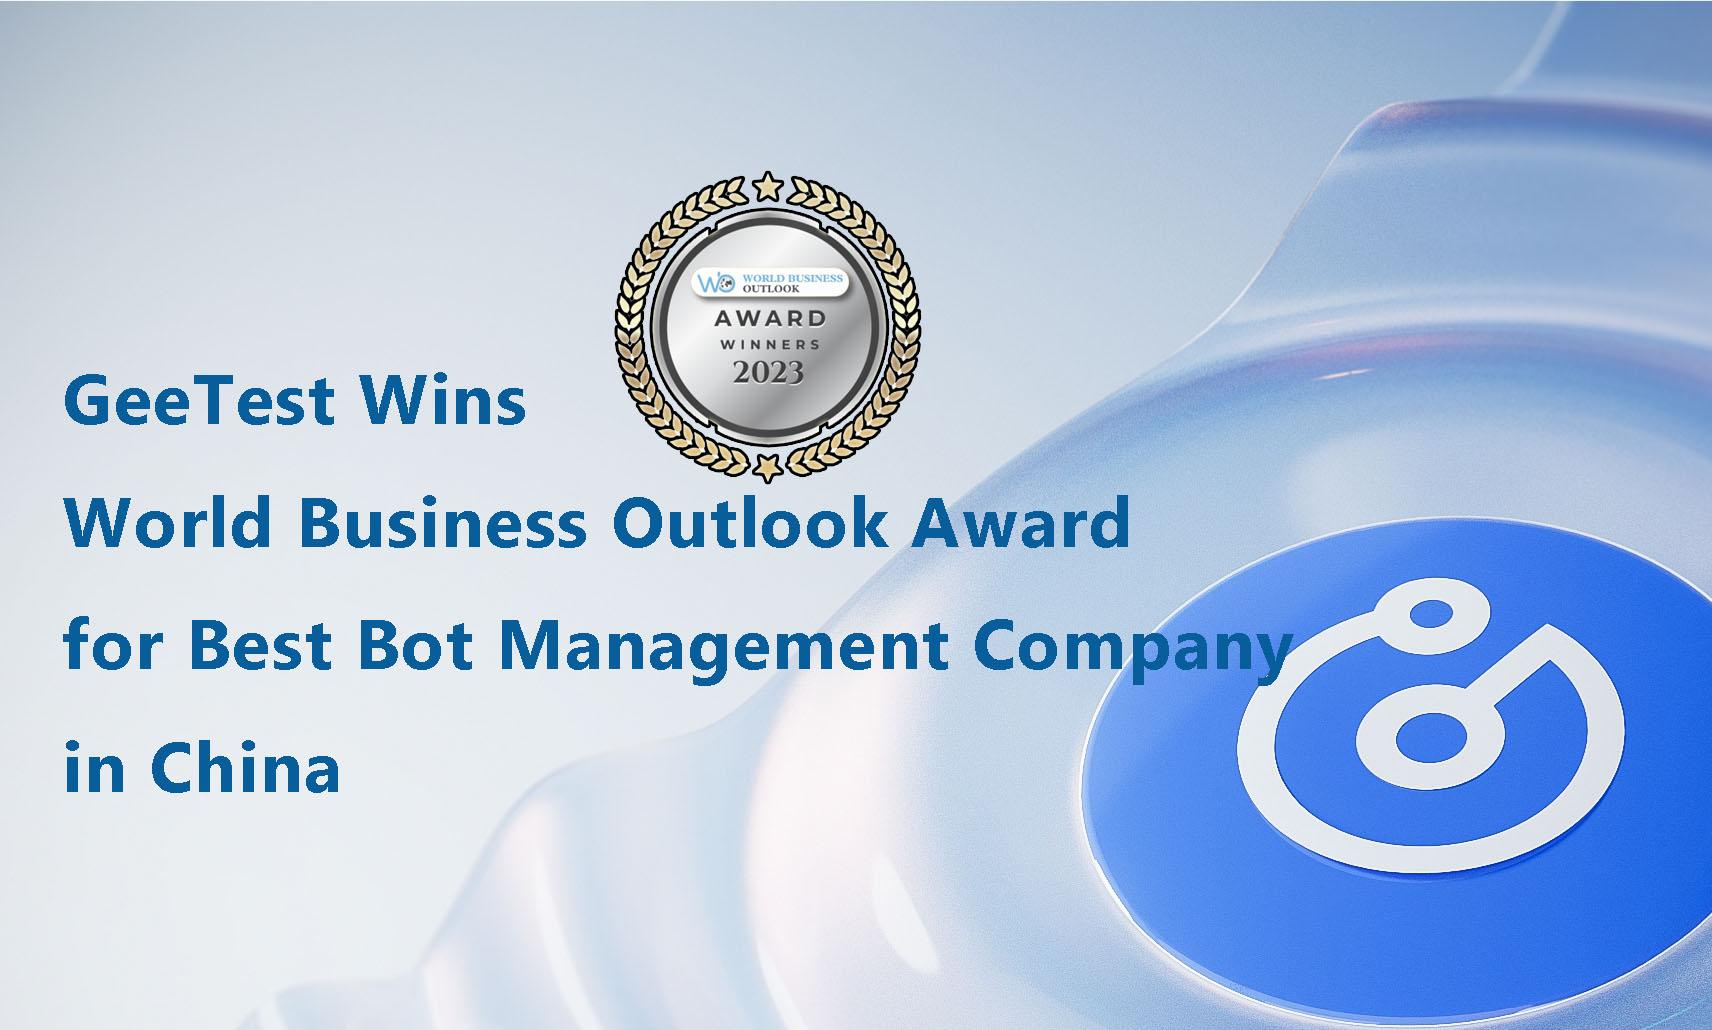 We are thrilled to announce that GeeTest has been honored with the prestigious World Business Outlook Award for Best Bot Management Company in China 2023. This